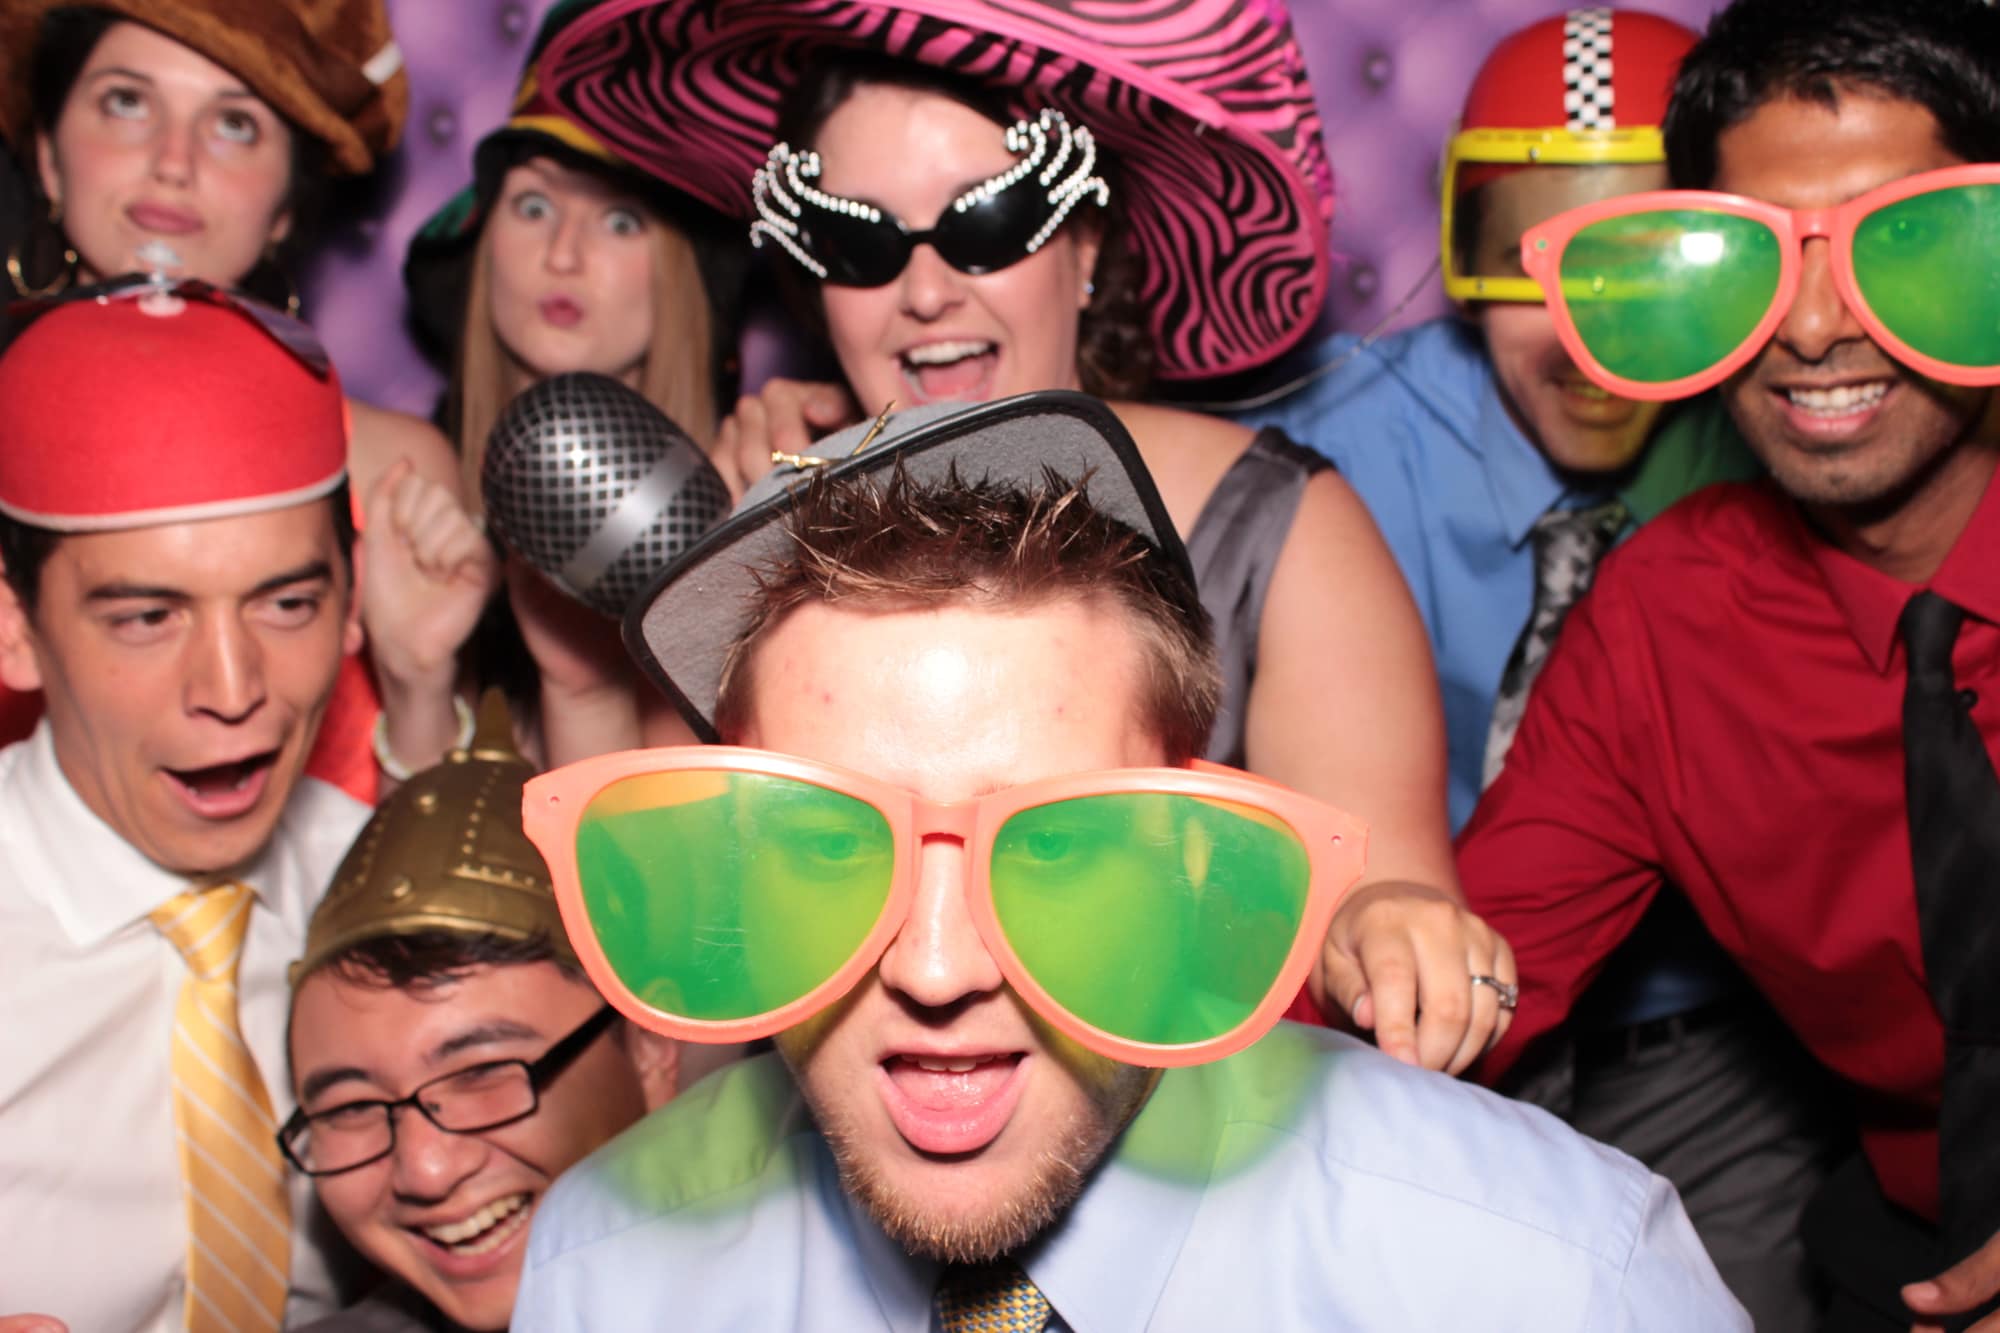 Photo-Booth-Rental-Austin-LGBT-Wedding-Reception-Party-Props-Fun-No.1-Affordable-Social Media-Photography